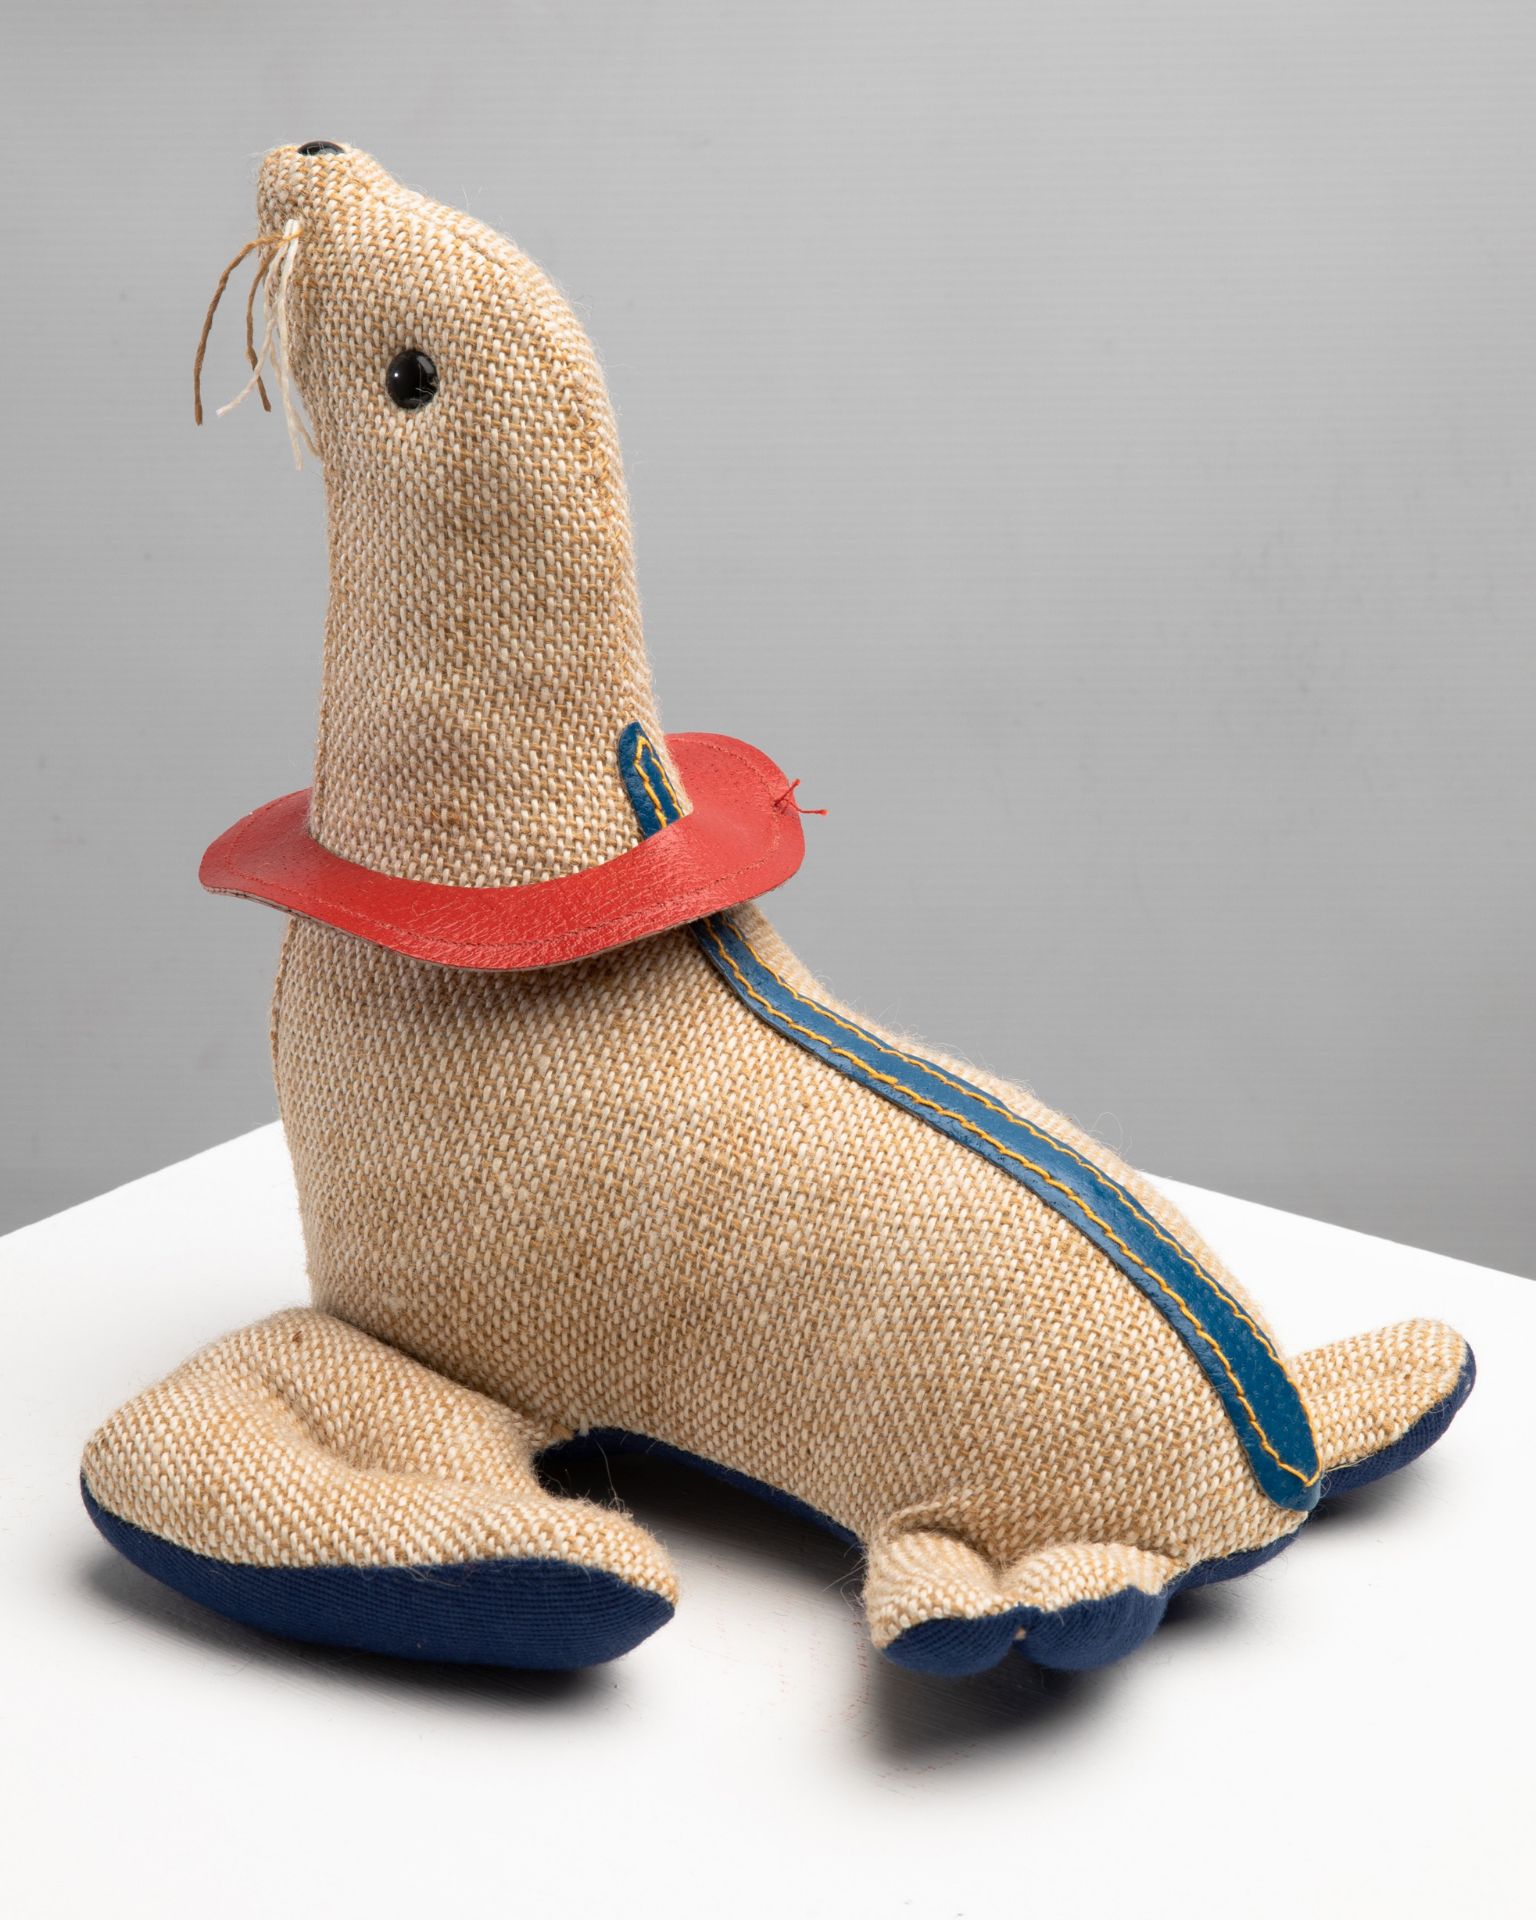 Renate Müller, Therapeutic Toy Seal